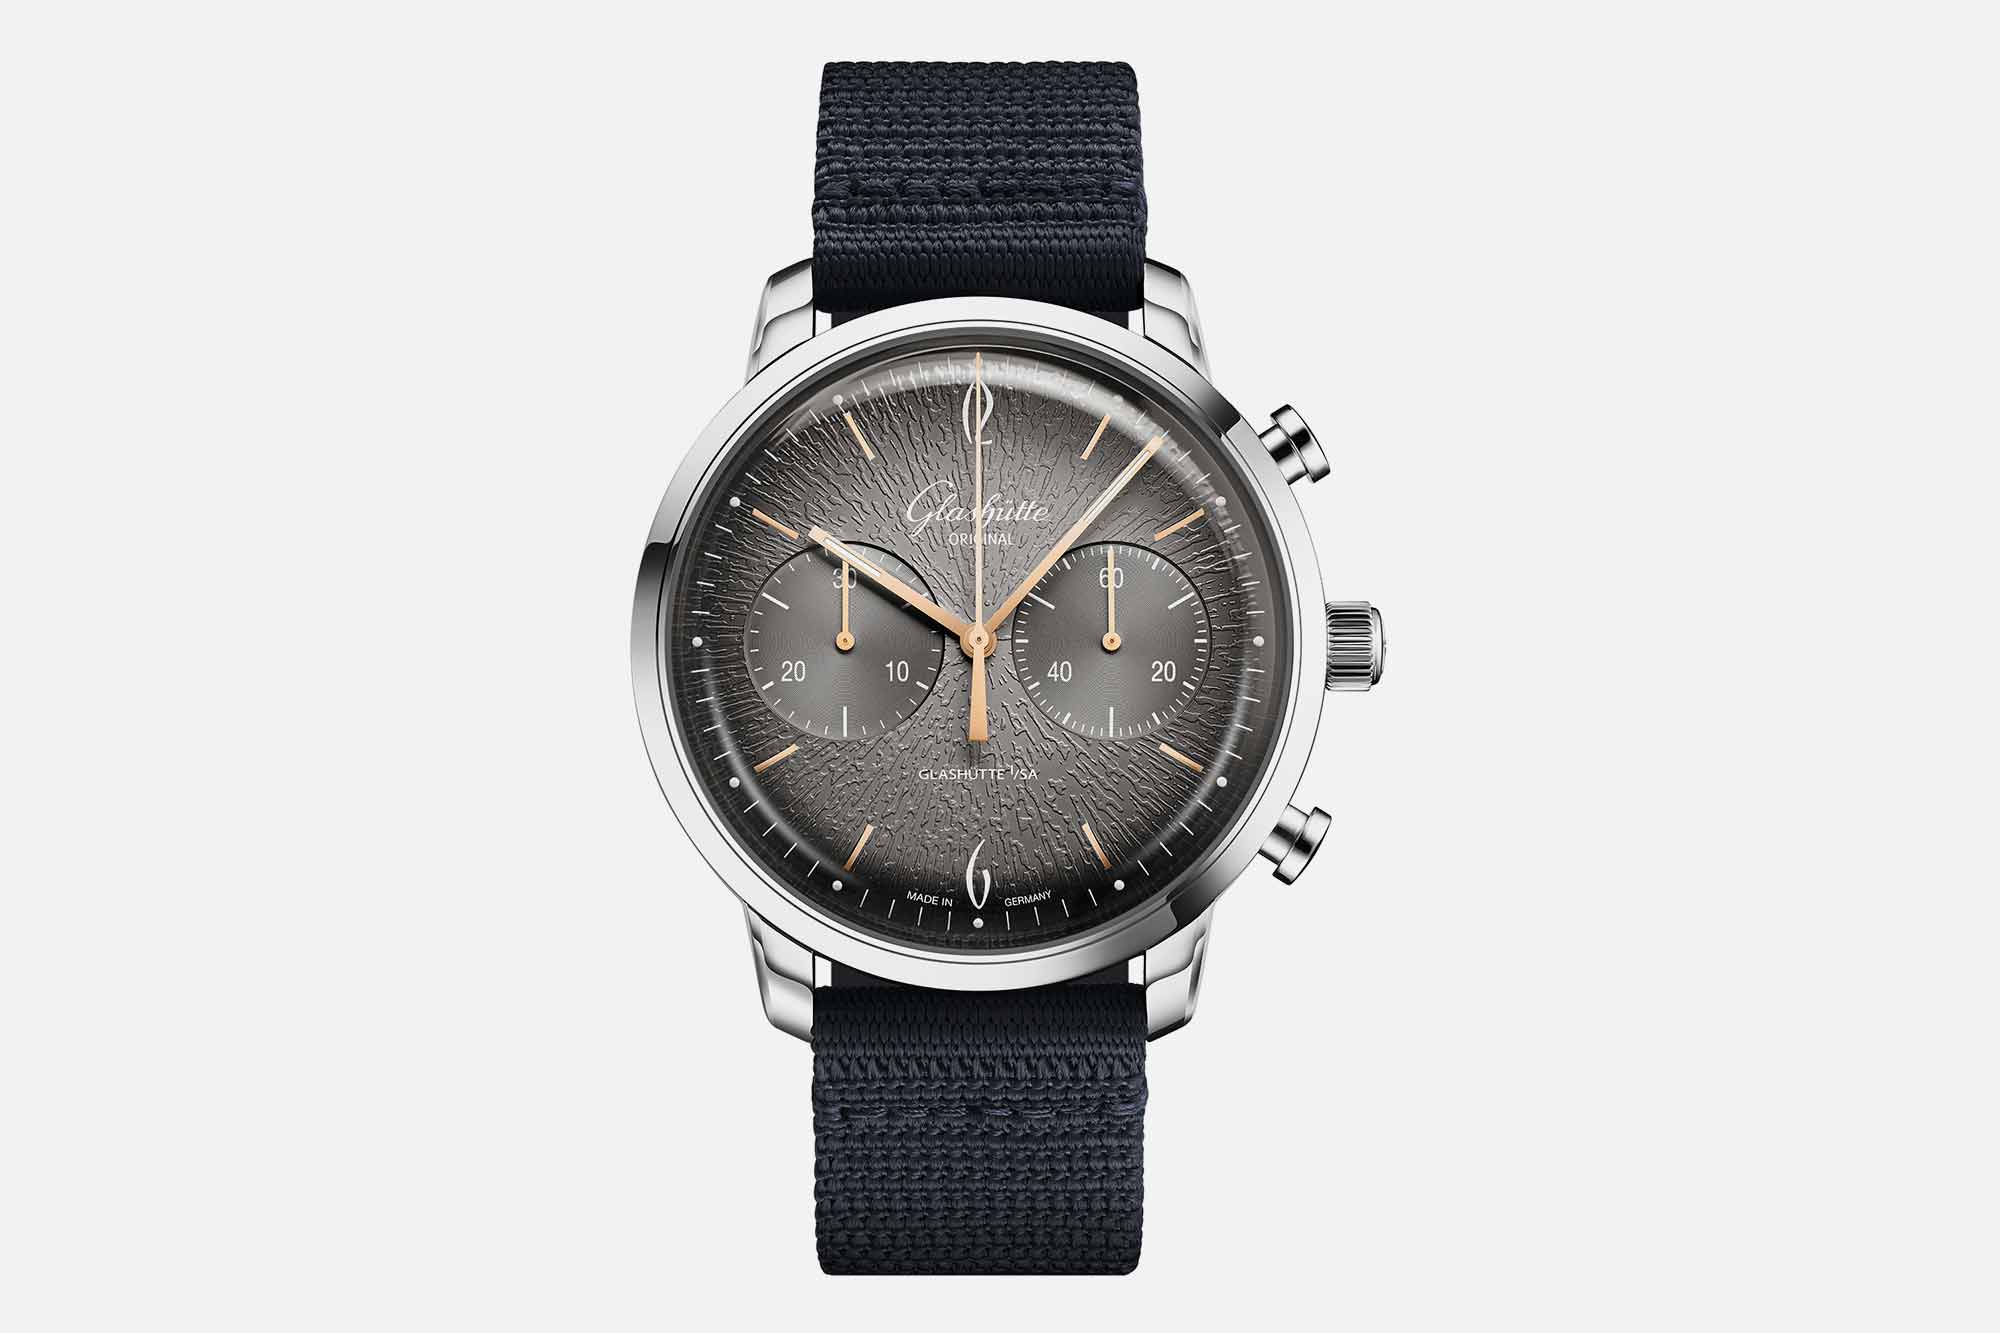 Glashütte Original Returns to the Swinging Sixties with their Latest Chronograph